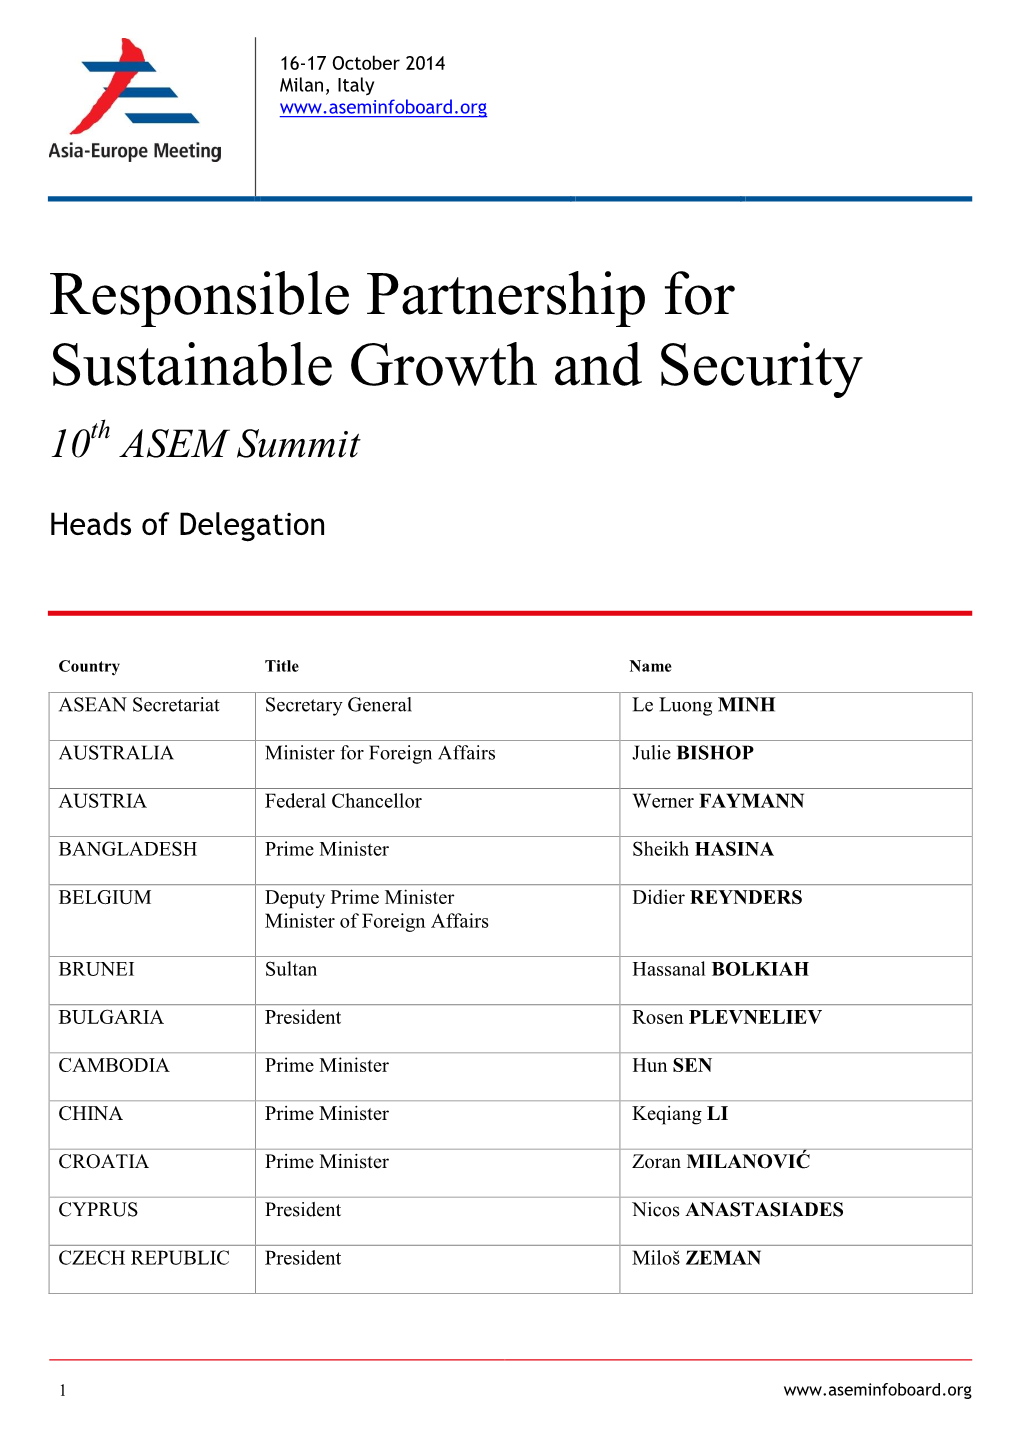 Responsible Partnership for Sustainable Growth and Security 10Th ASEM Summit